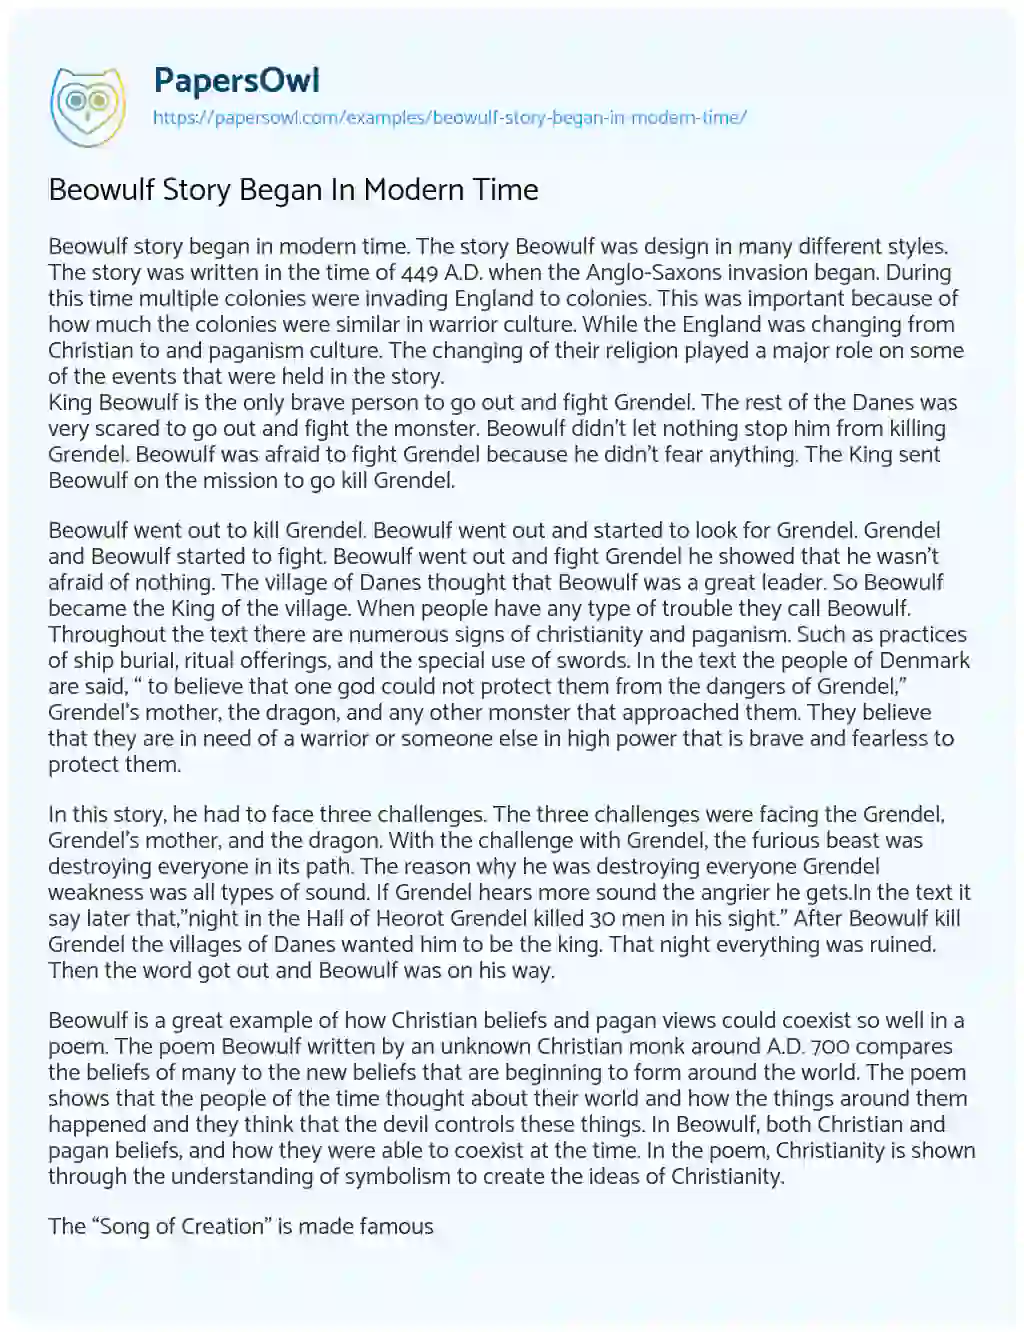 Beowulf Story Began in Modern Time essay